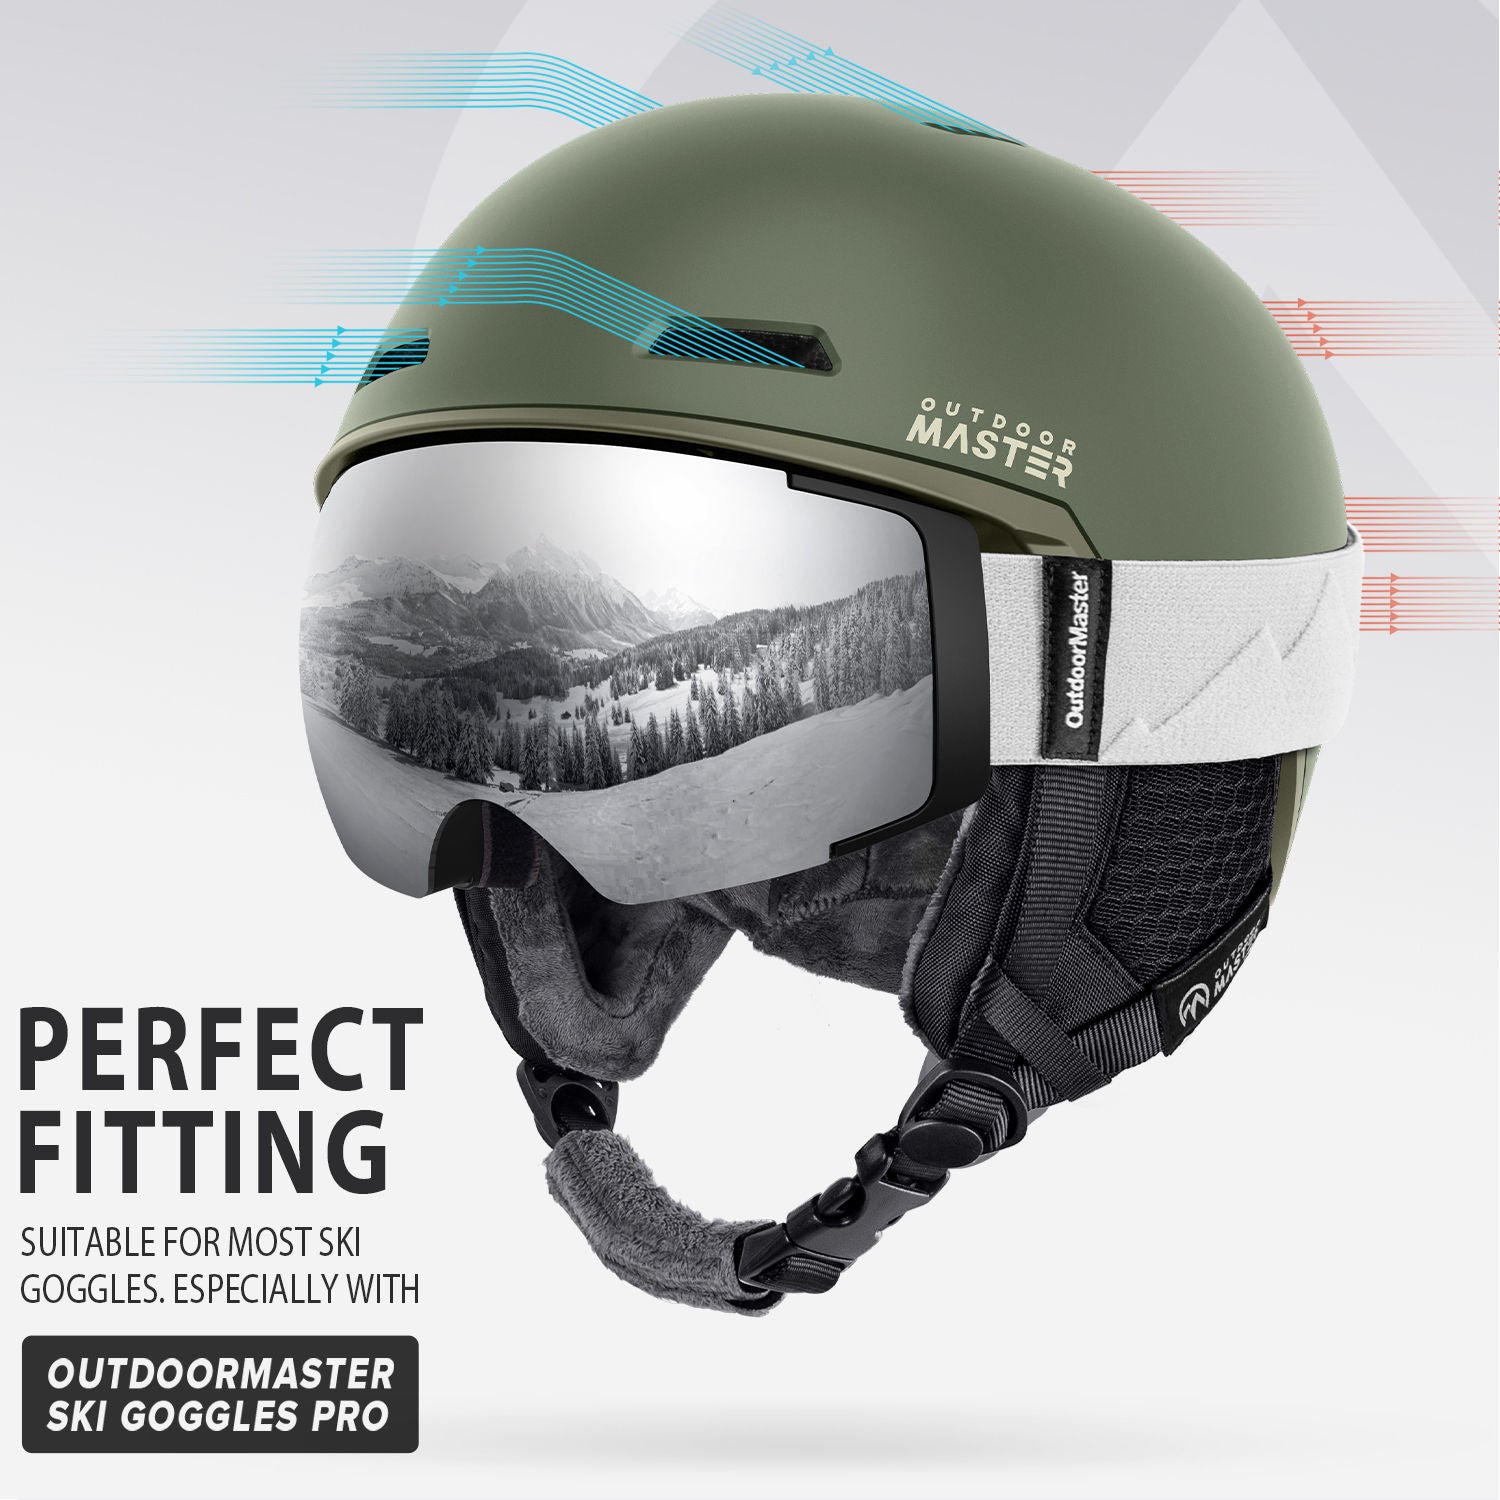 green ski helmet with airflow evaluation channel